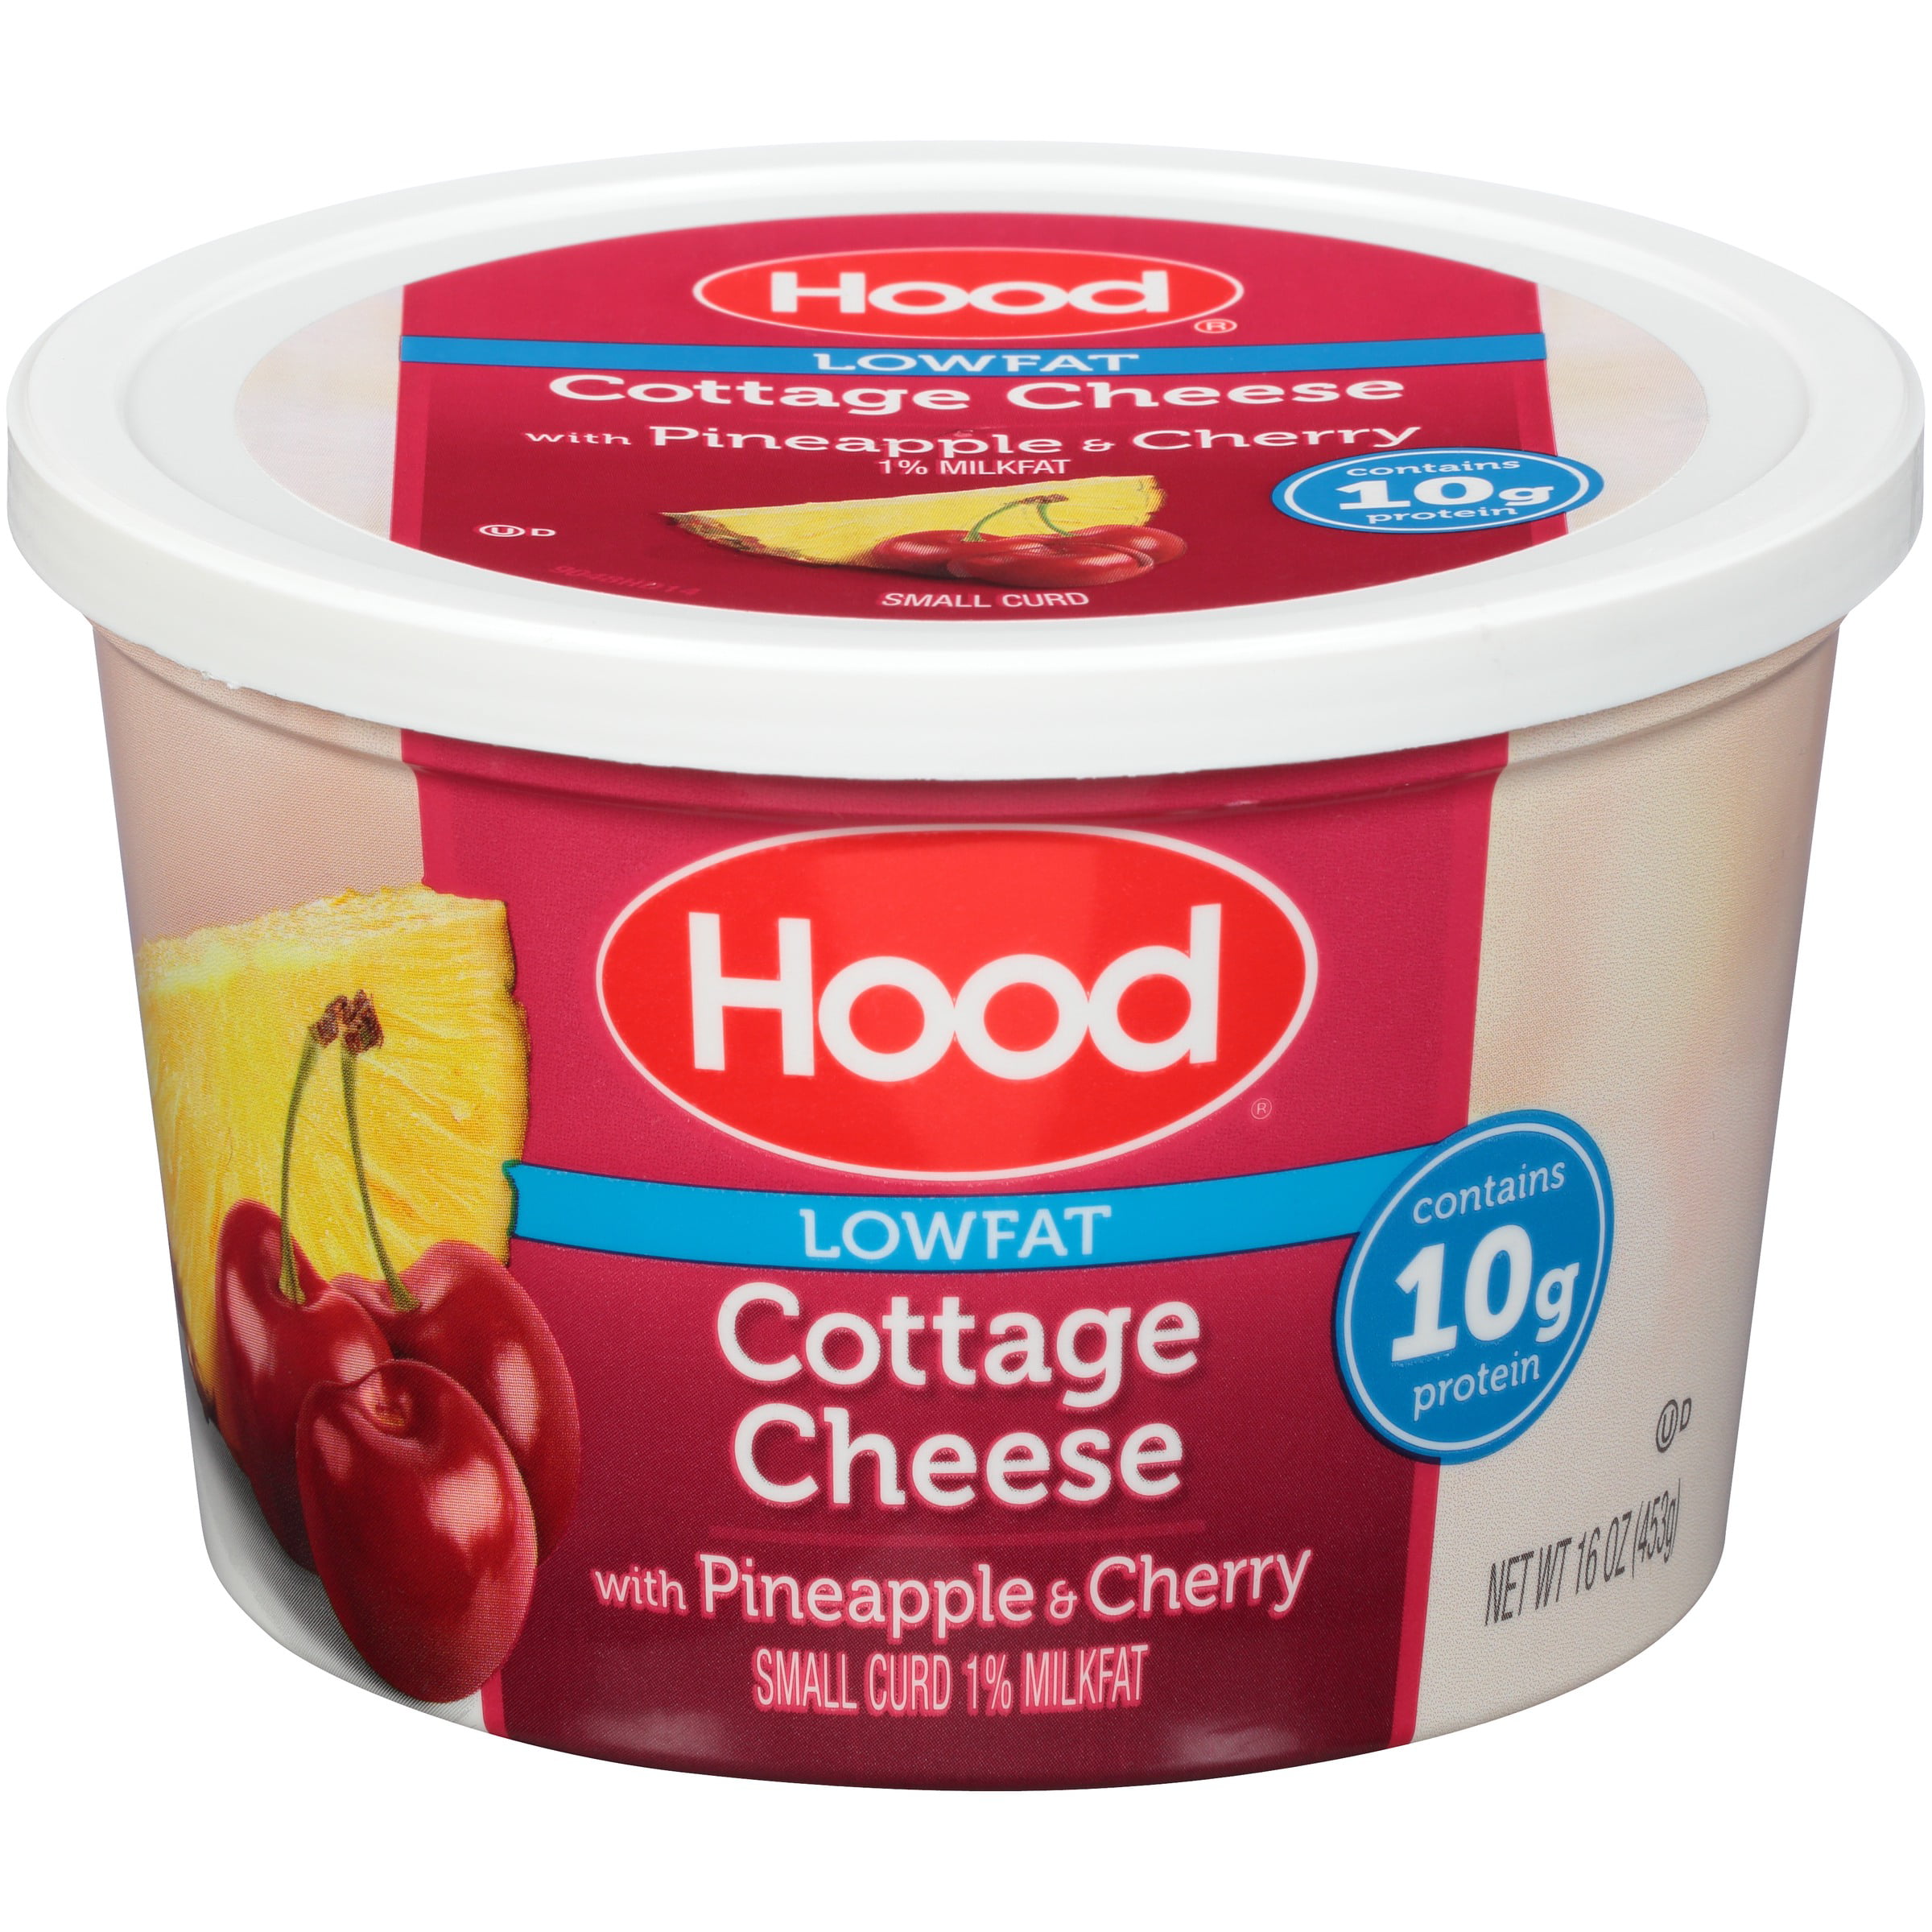 Hood 1 Milk Fat Pineapple Cherry Flavored Small Curd Cottage